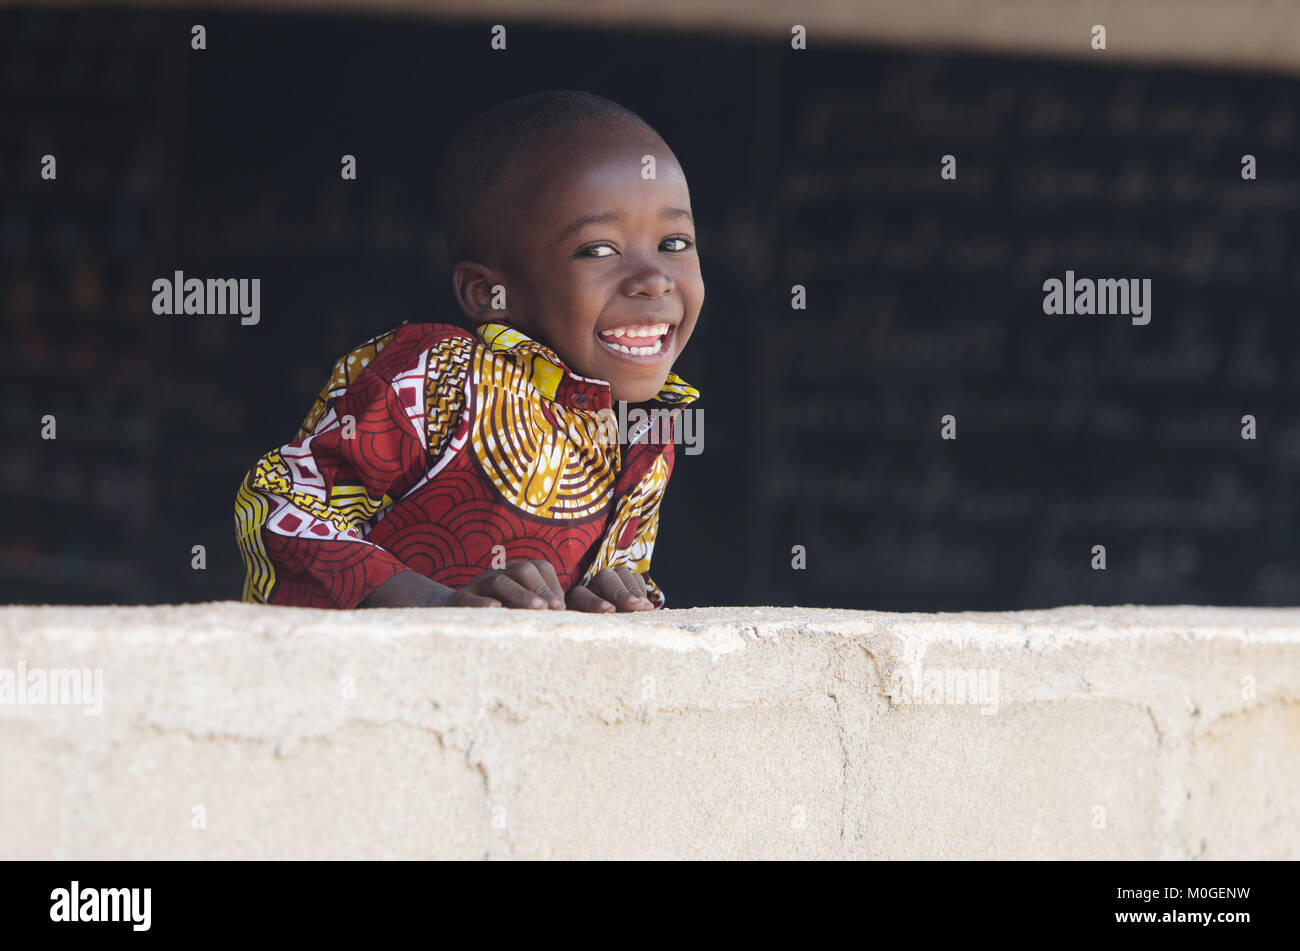 Handsome African Baby Boy Laughing Behind Wall at School Stock Photo